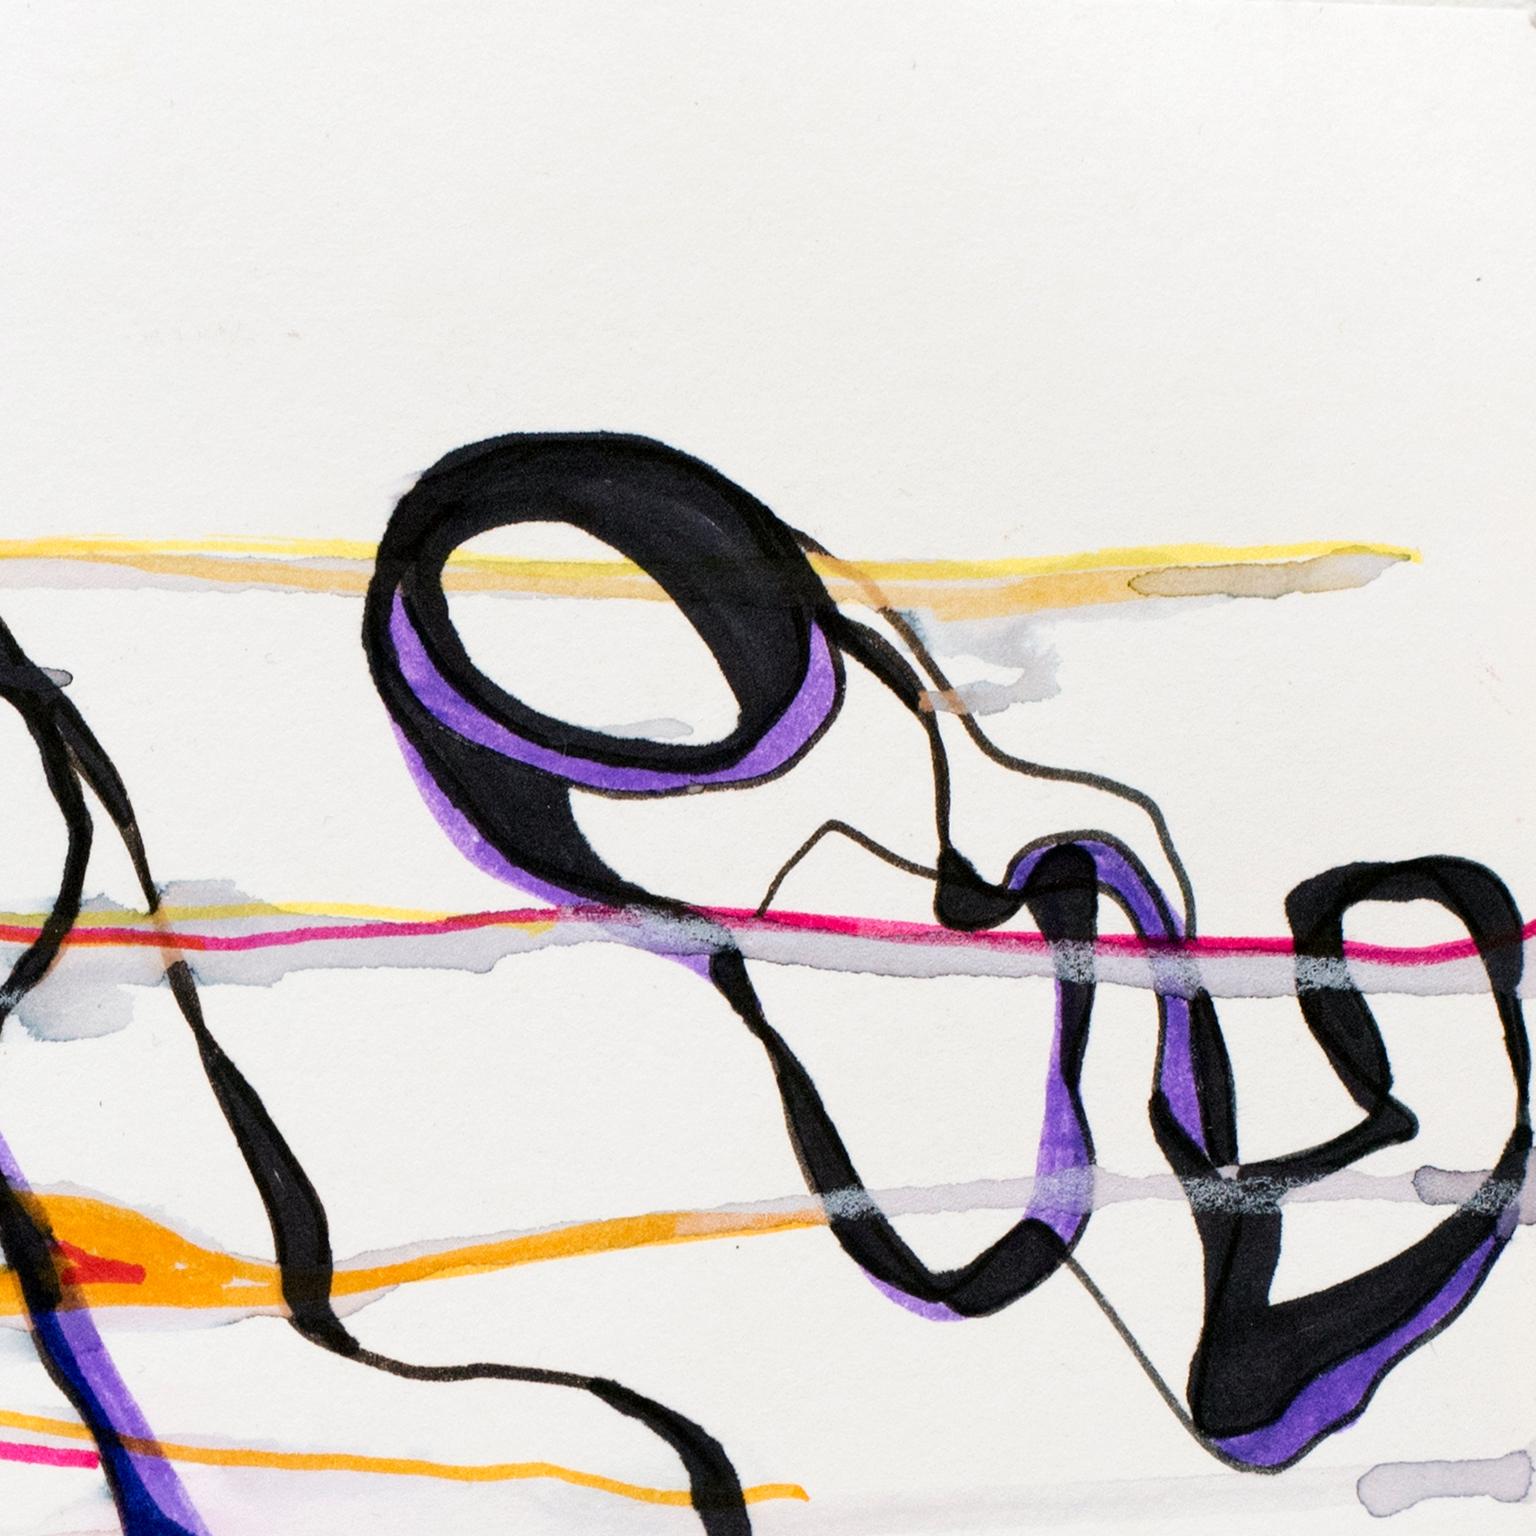 me too ii by Erin McAllister. Colored ink on paper. Depicts used condoms  For Sale 3